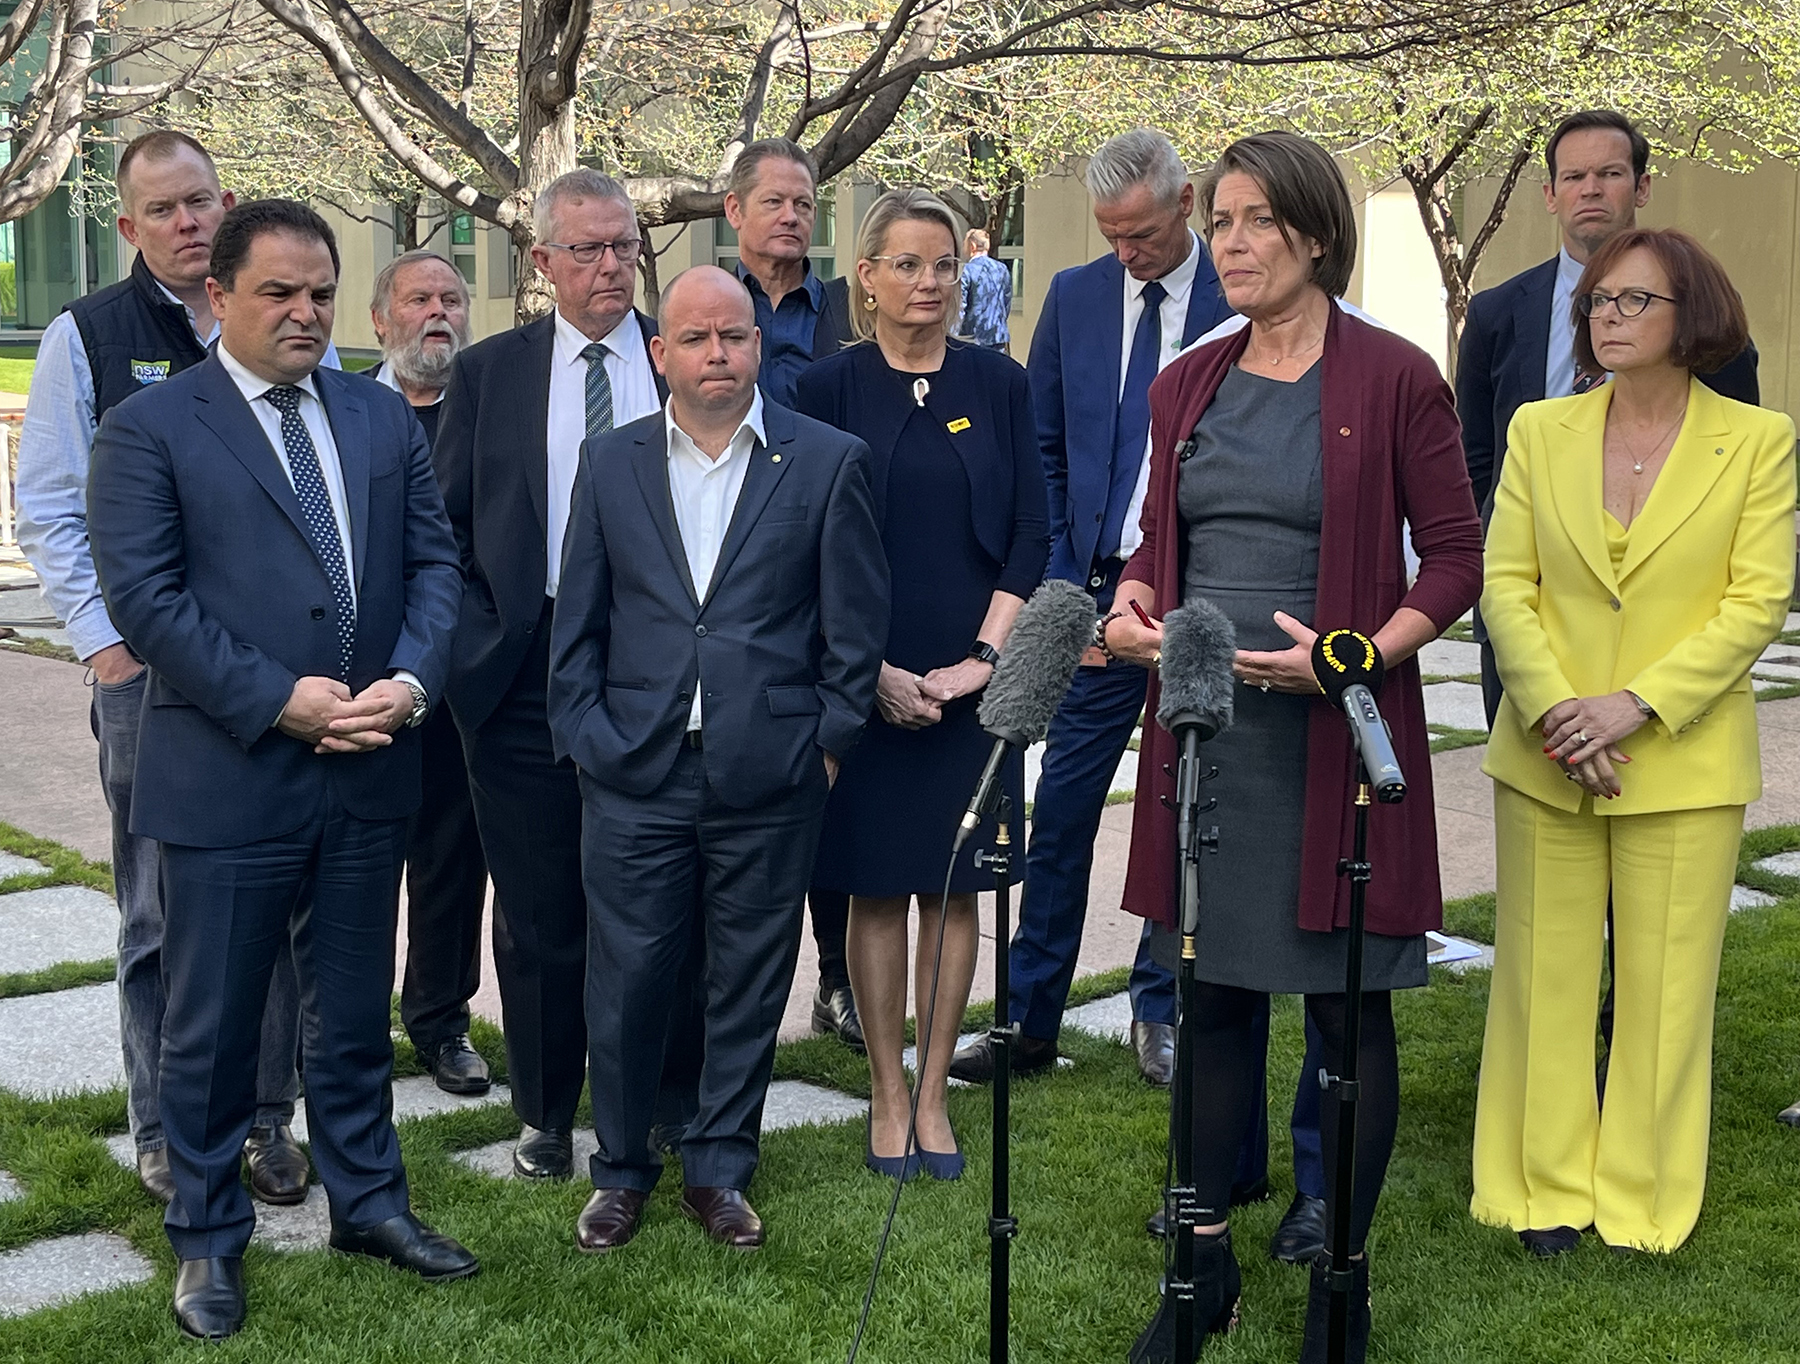 Michael Murray of Cotton Australia joined with peak agriculture bodies in Canberra to voice their opposition to the proposed Water Act amendments